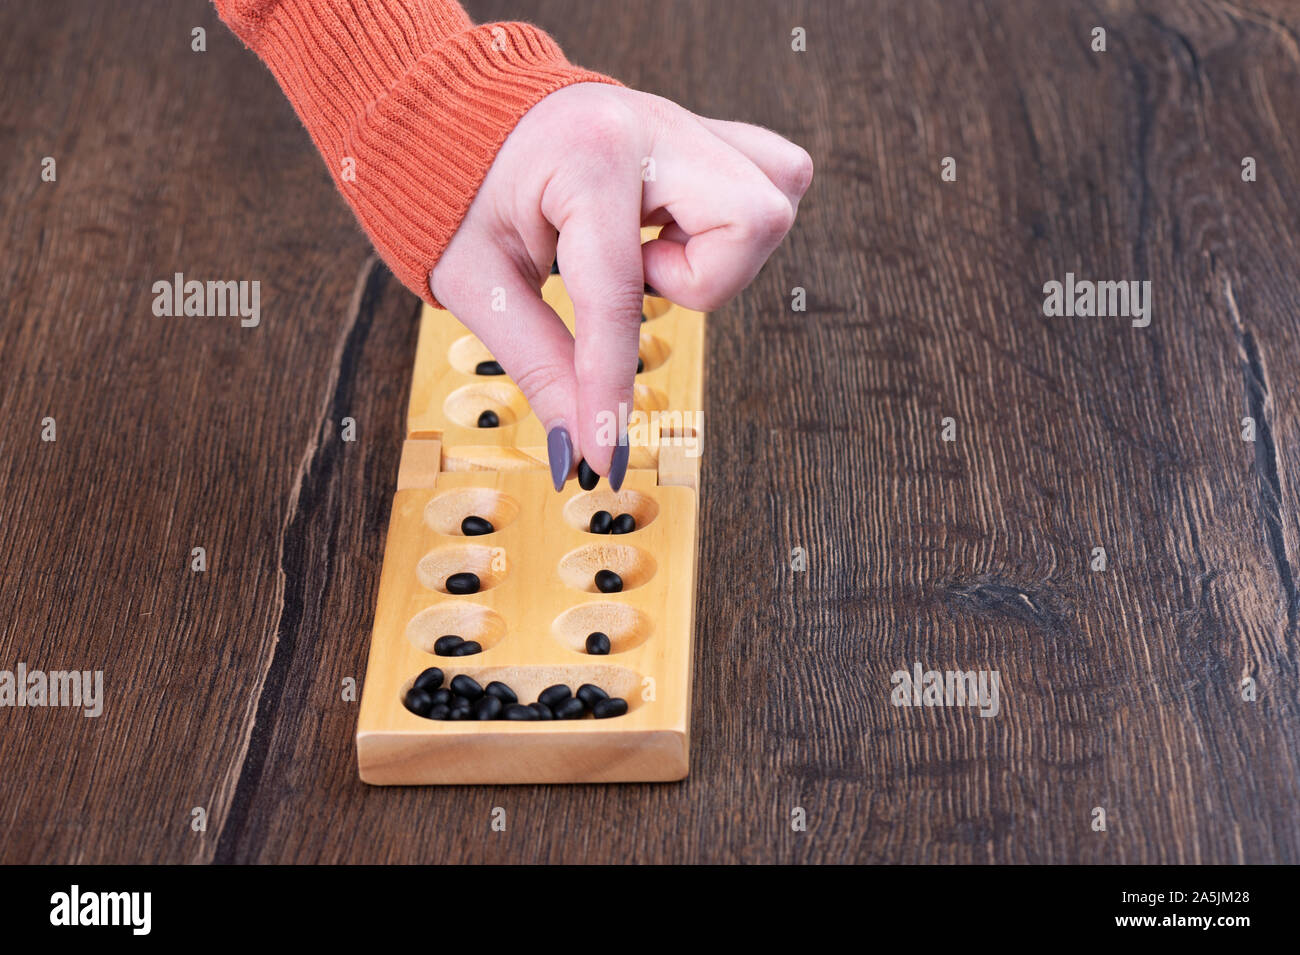 The girl makes a move in the game mankala. The concept of board games. Stock Photo